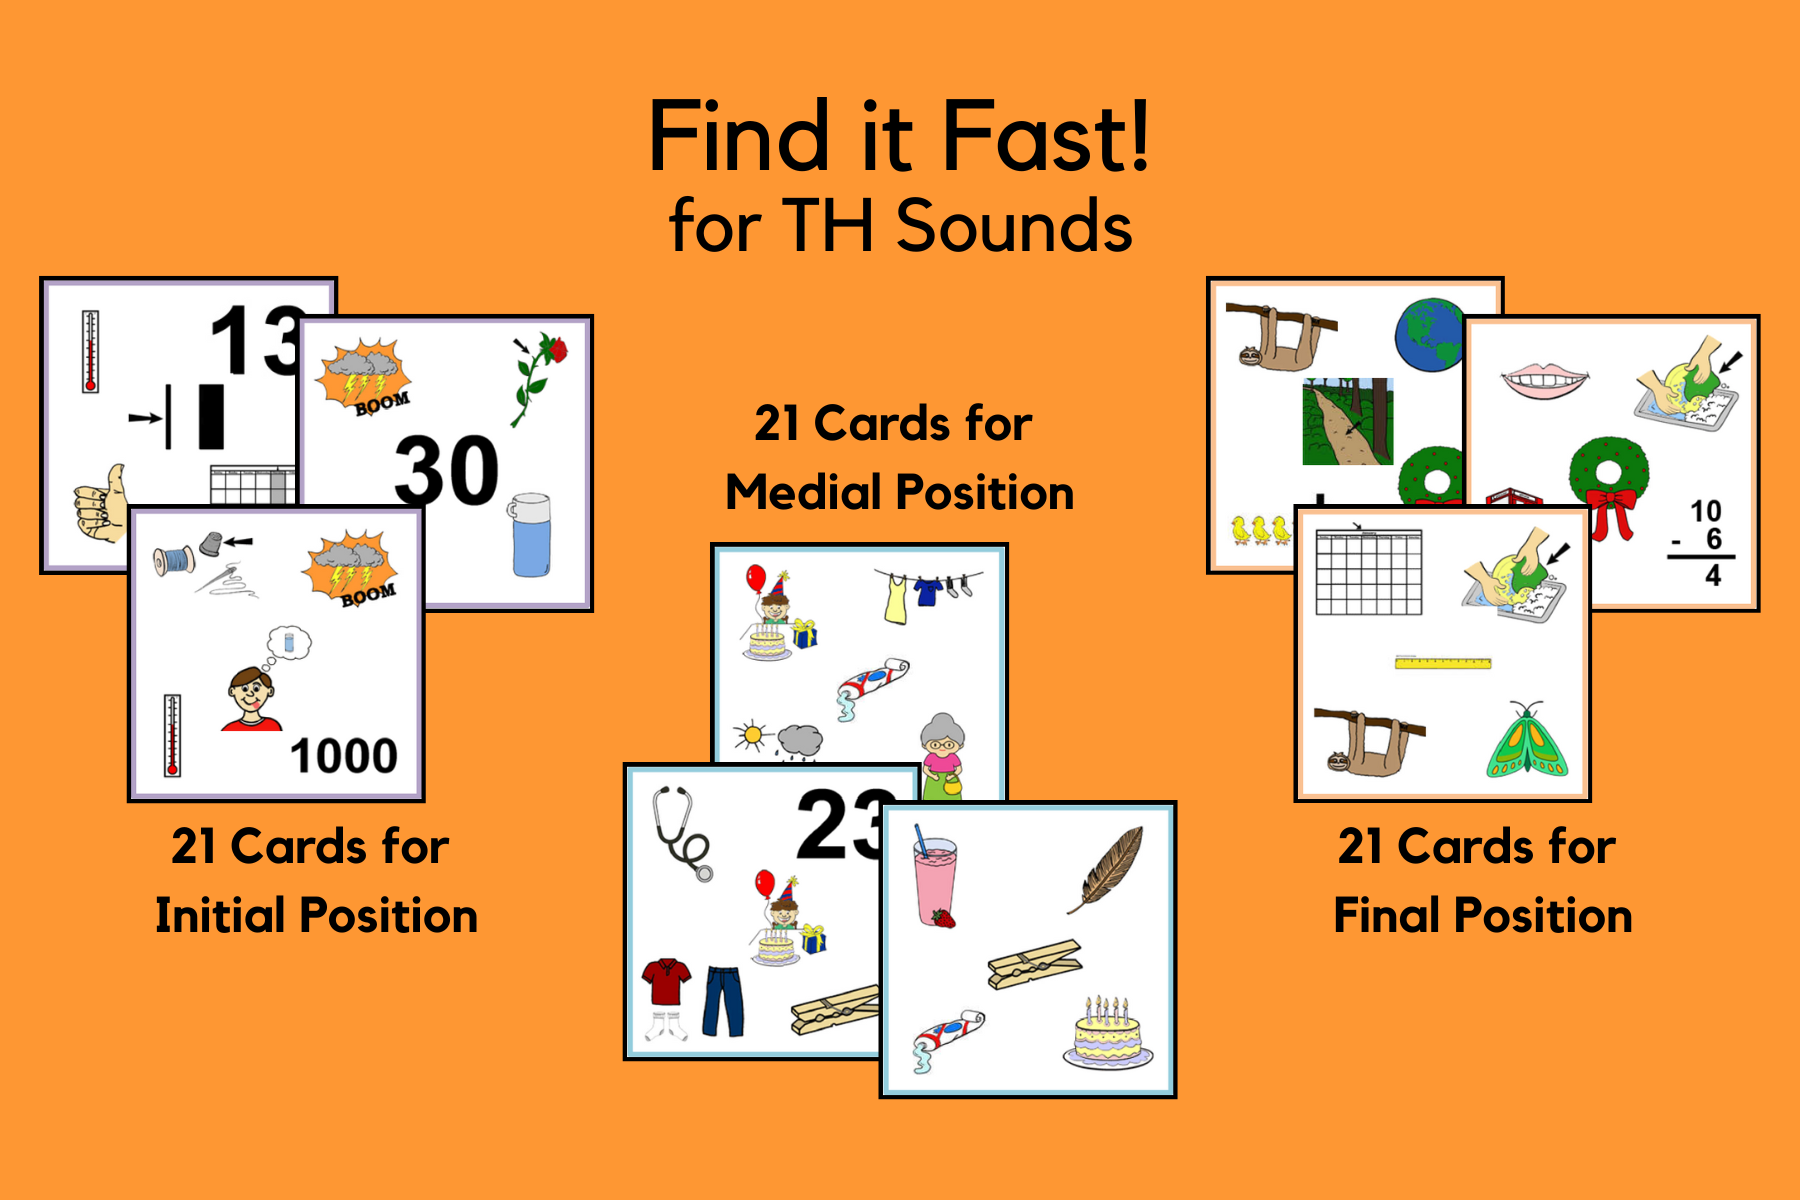 Find It Fast Game for TH Sounds